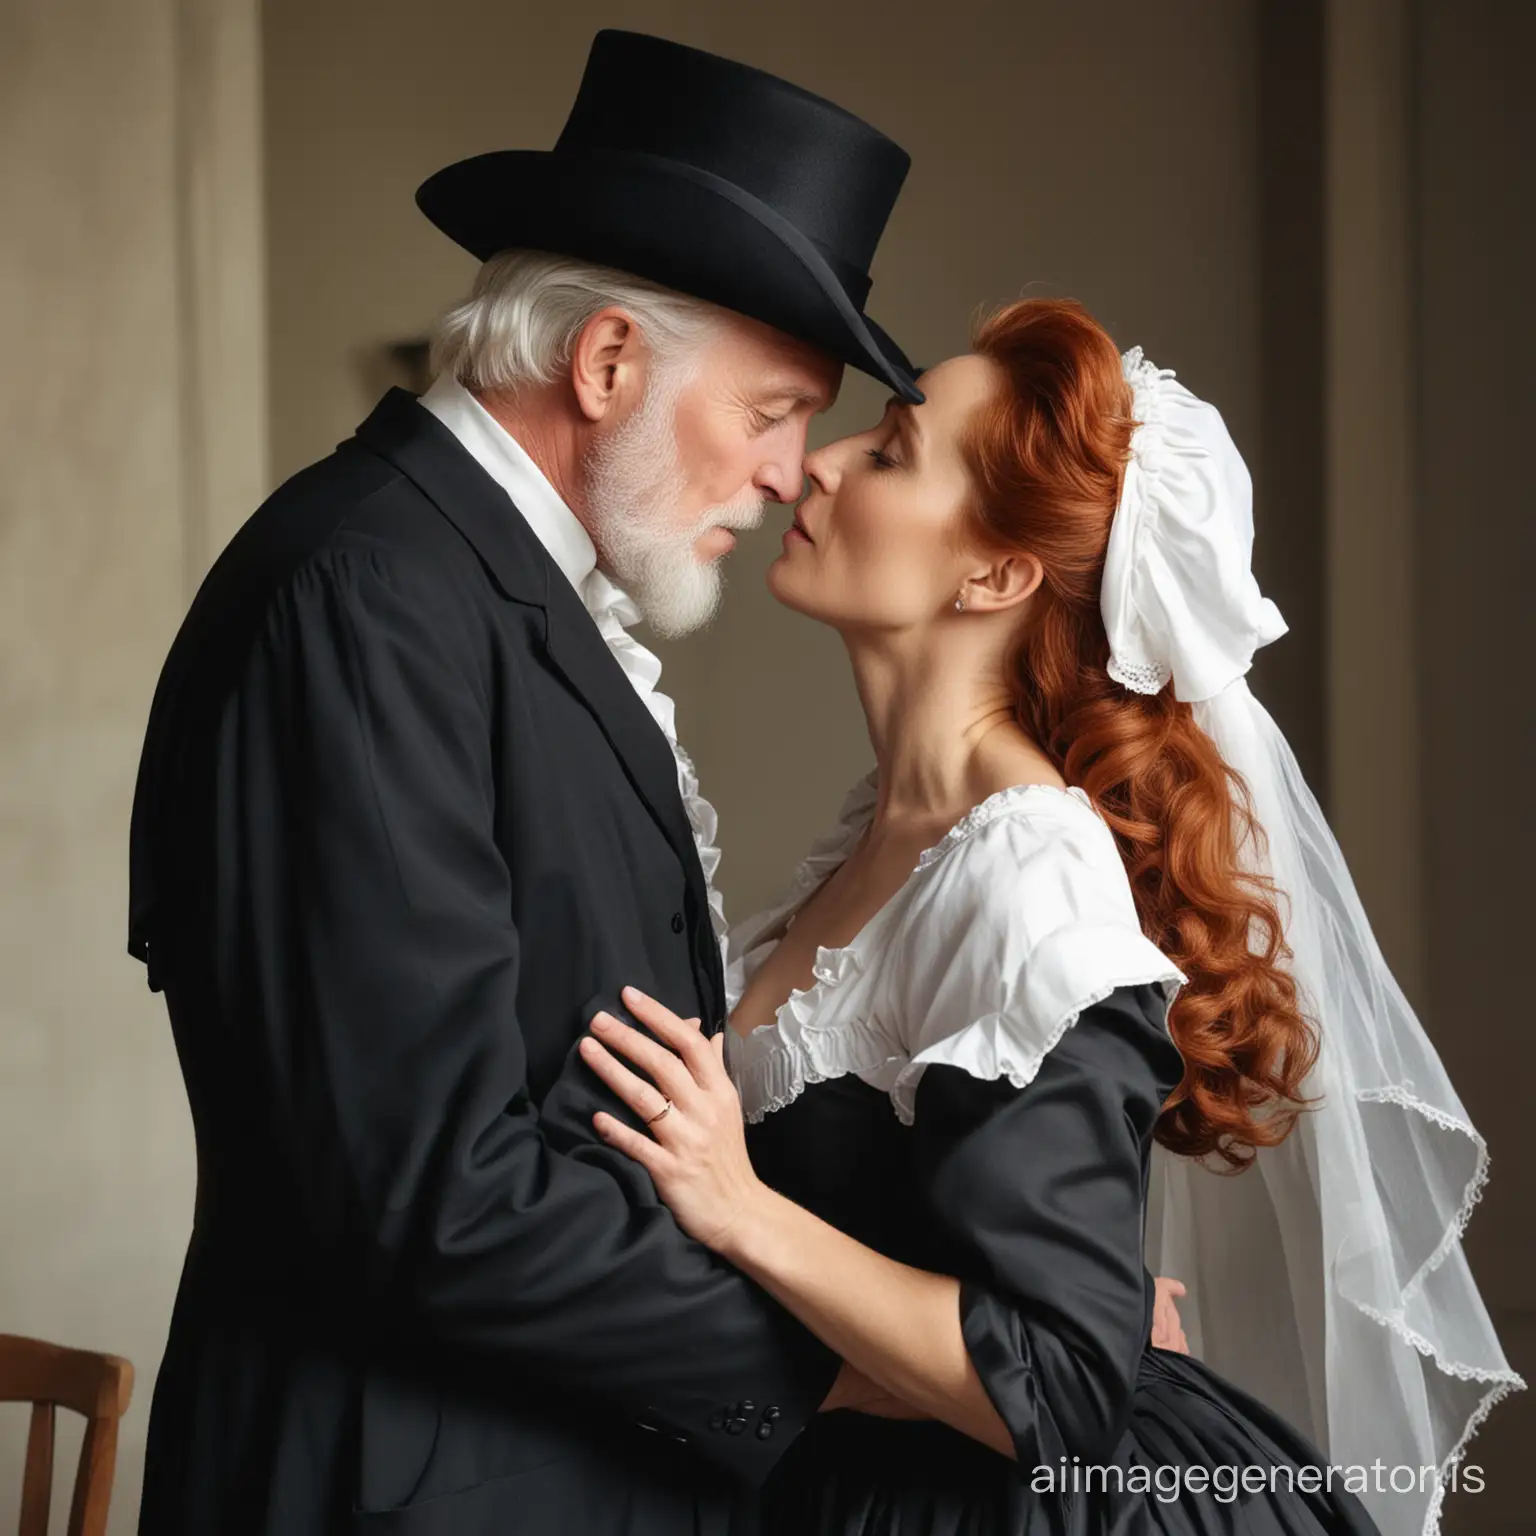 RedHaired-Gillian-Anderson-in-Romantic-Puritan-Attire-Kissing-Her-New-Husband